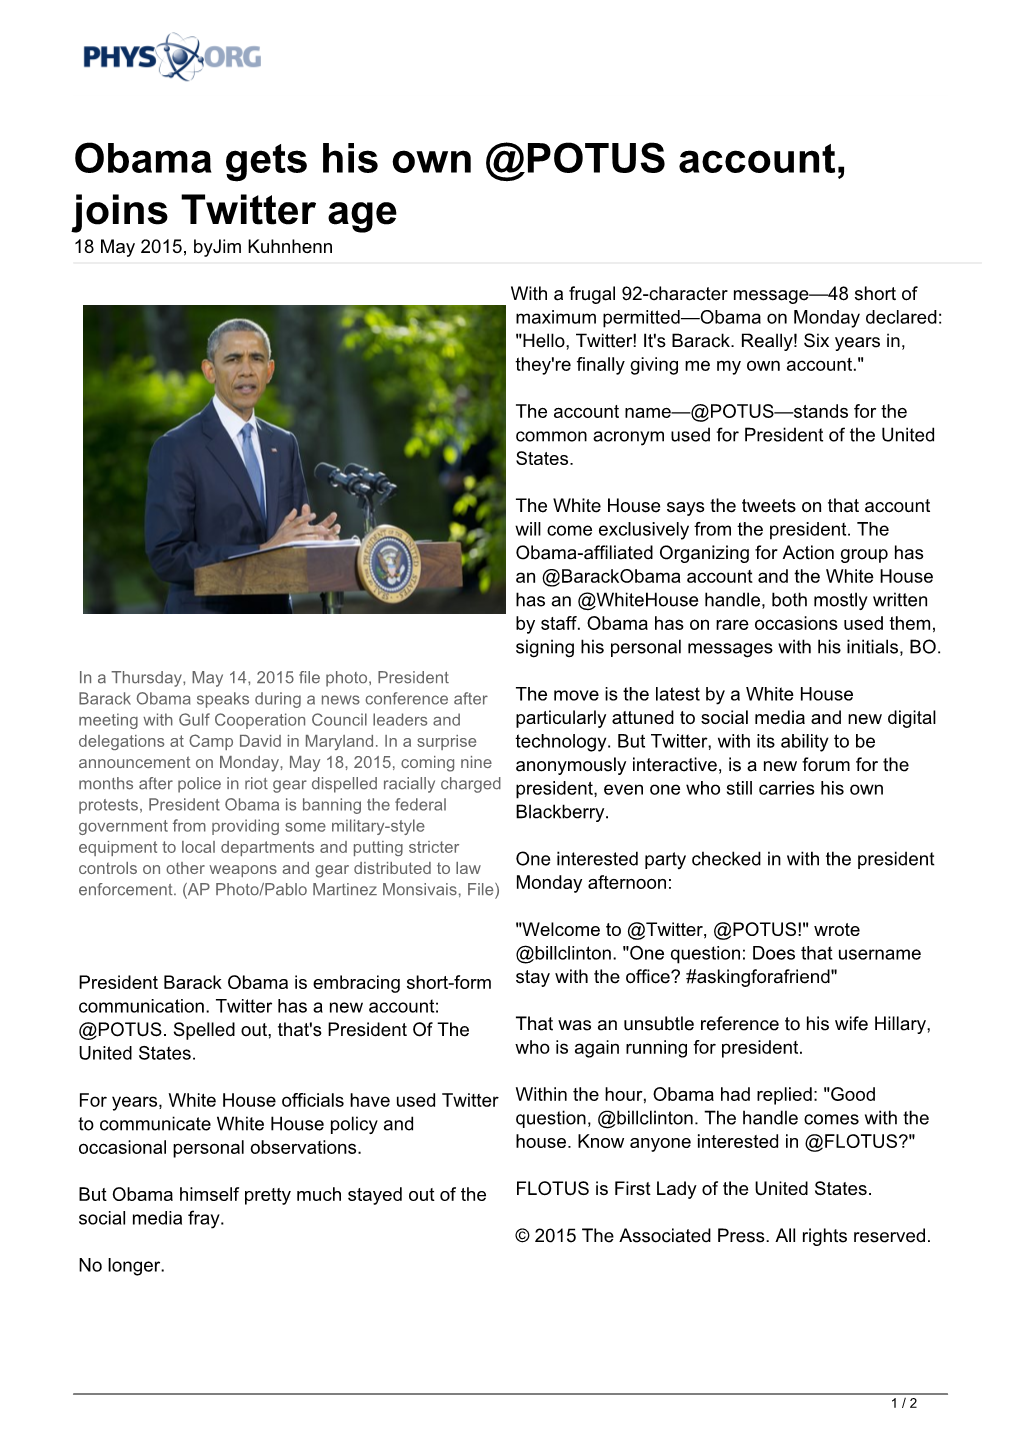 Obama Gets His Own @POTUS Account, Joins Twitter Age 18 May 2015, Byjim Kuhnhenn